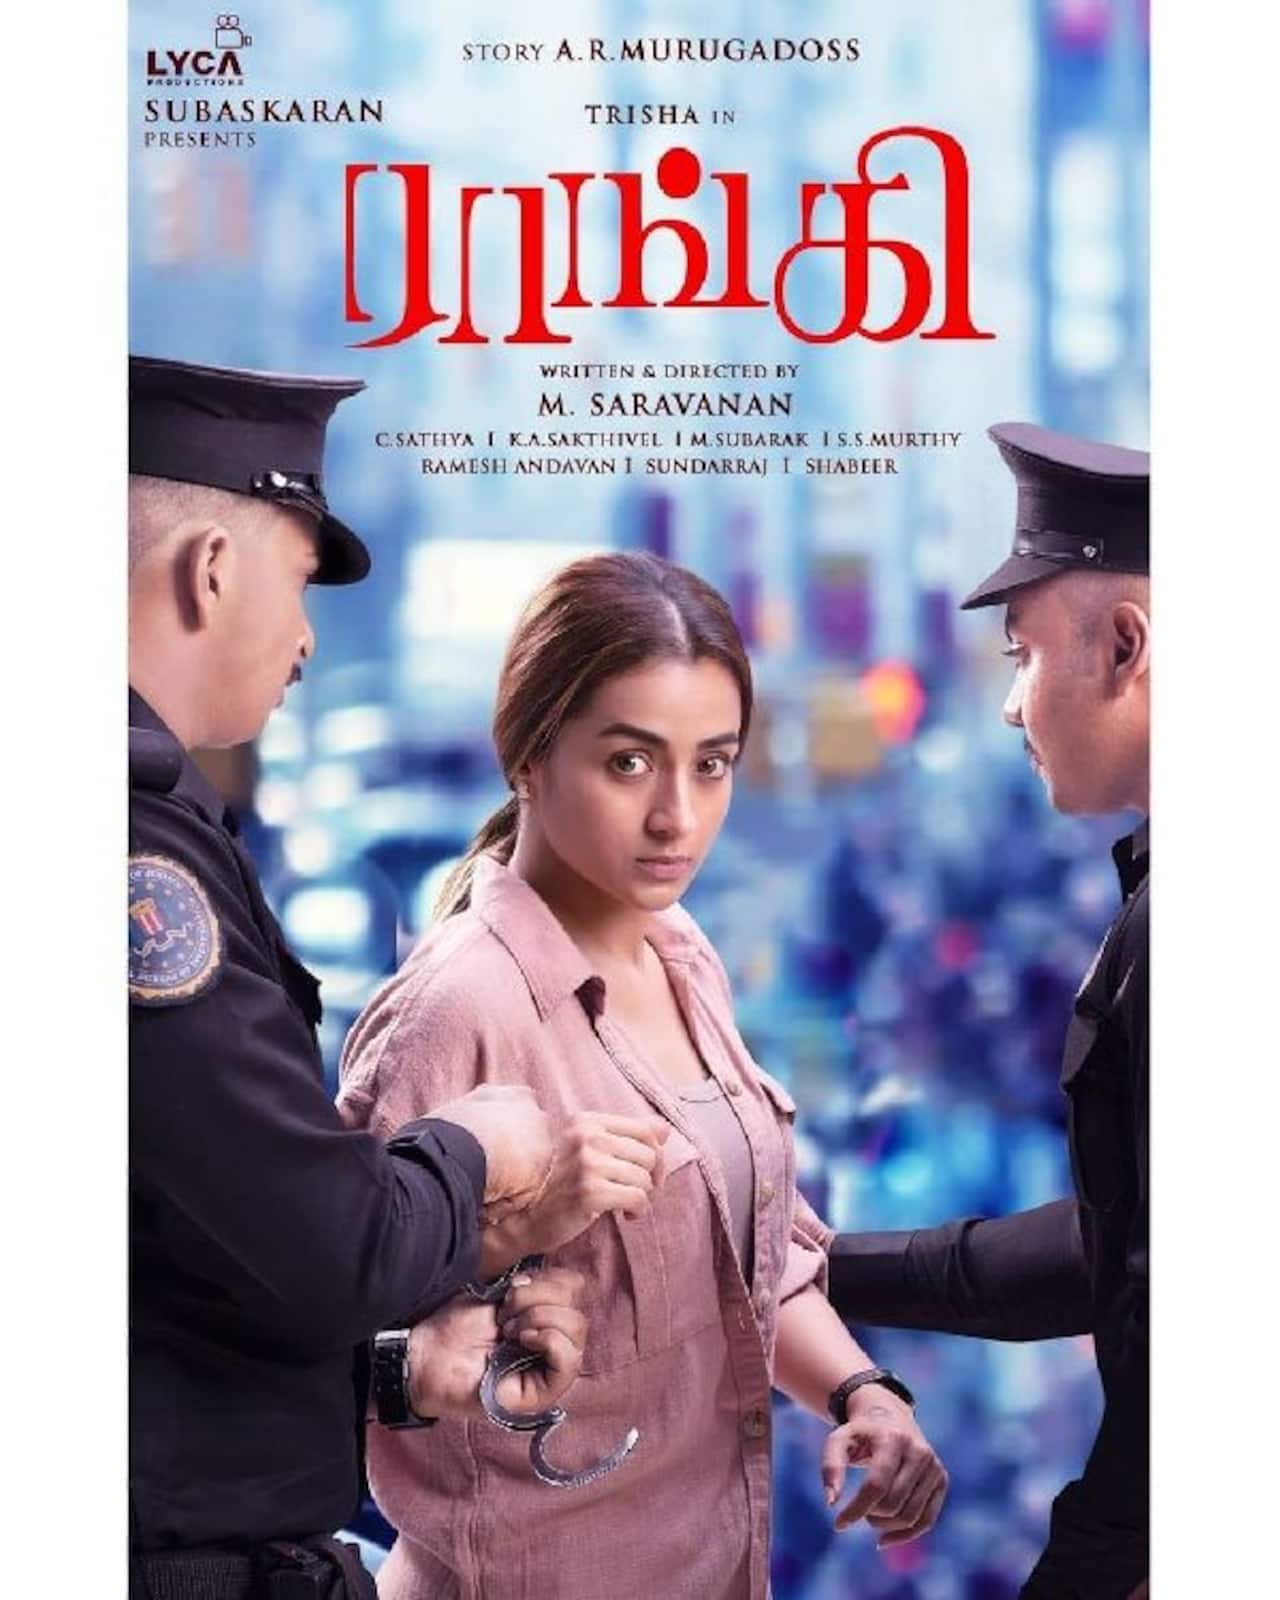 Raangi first look: Trisha Krishnan promises to take us on a thrilling ride with her intense eyes and subdued attire